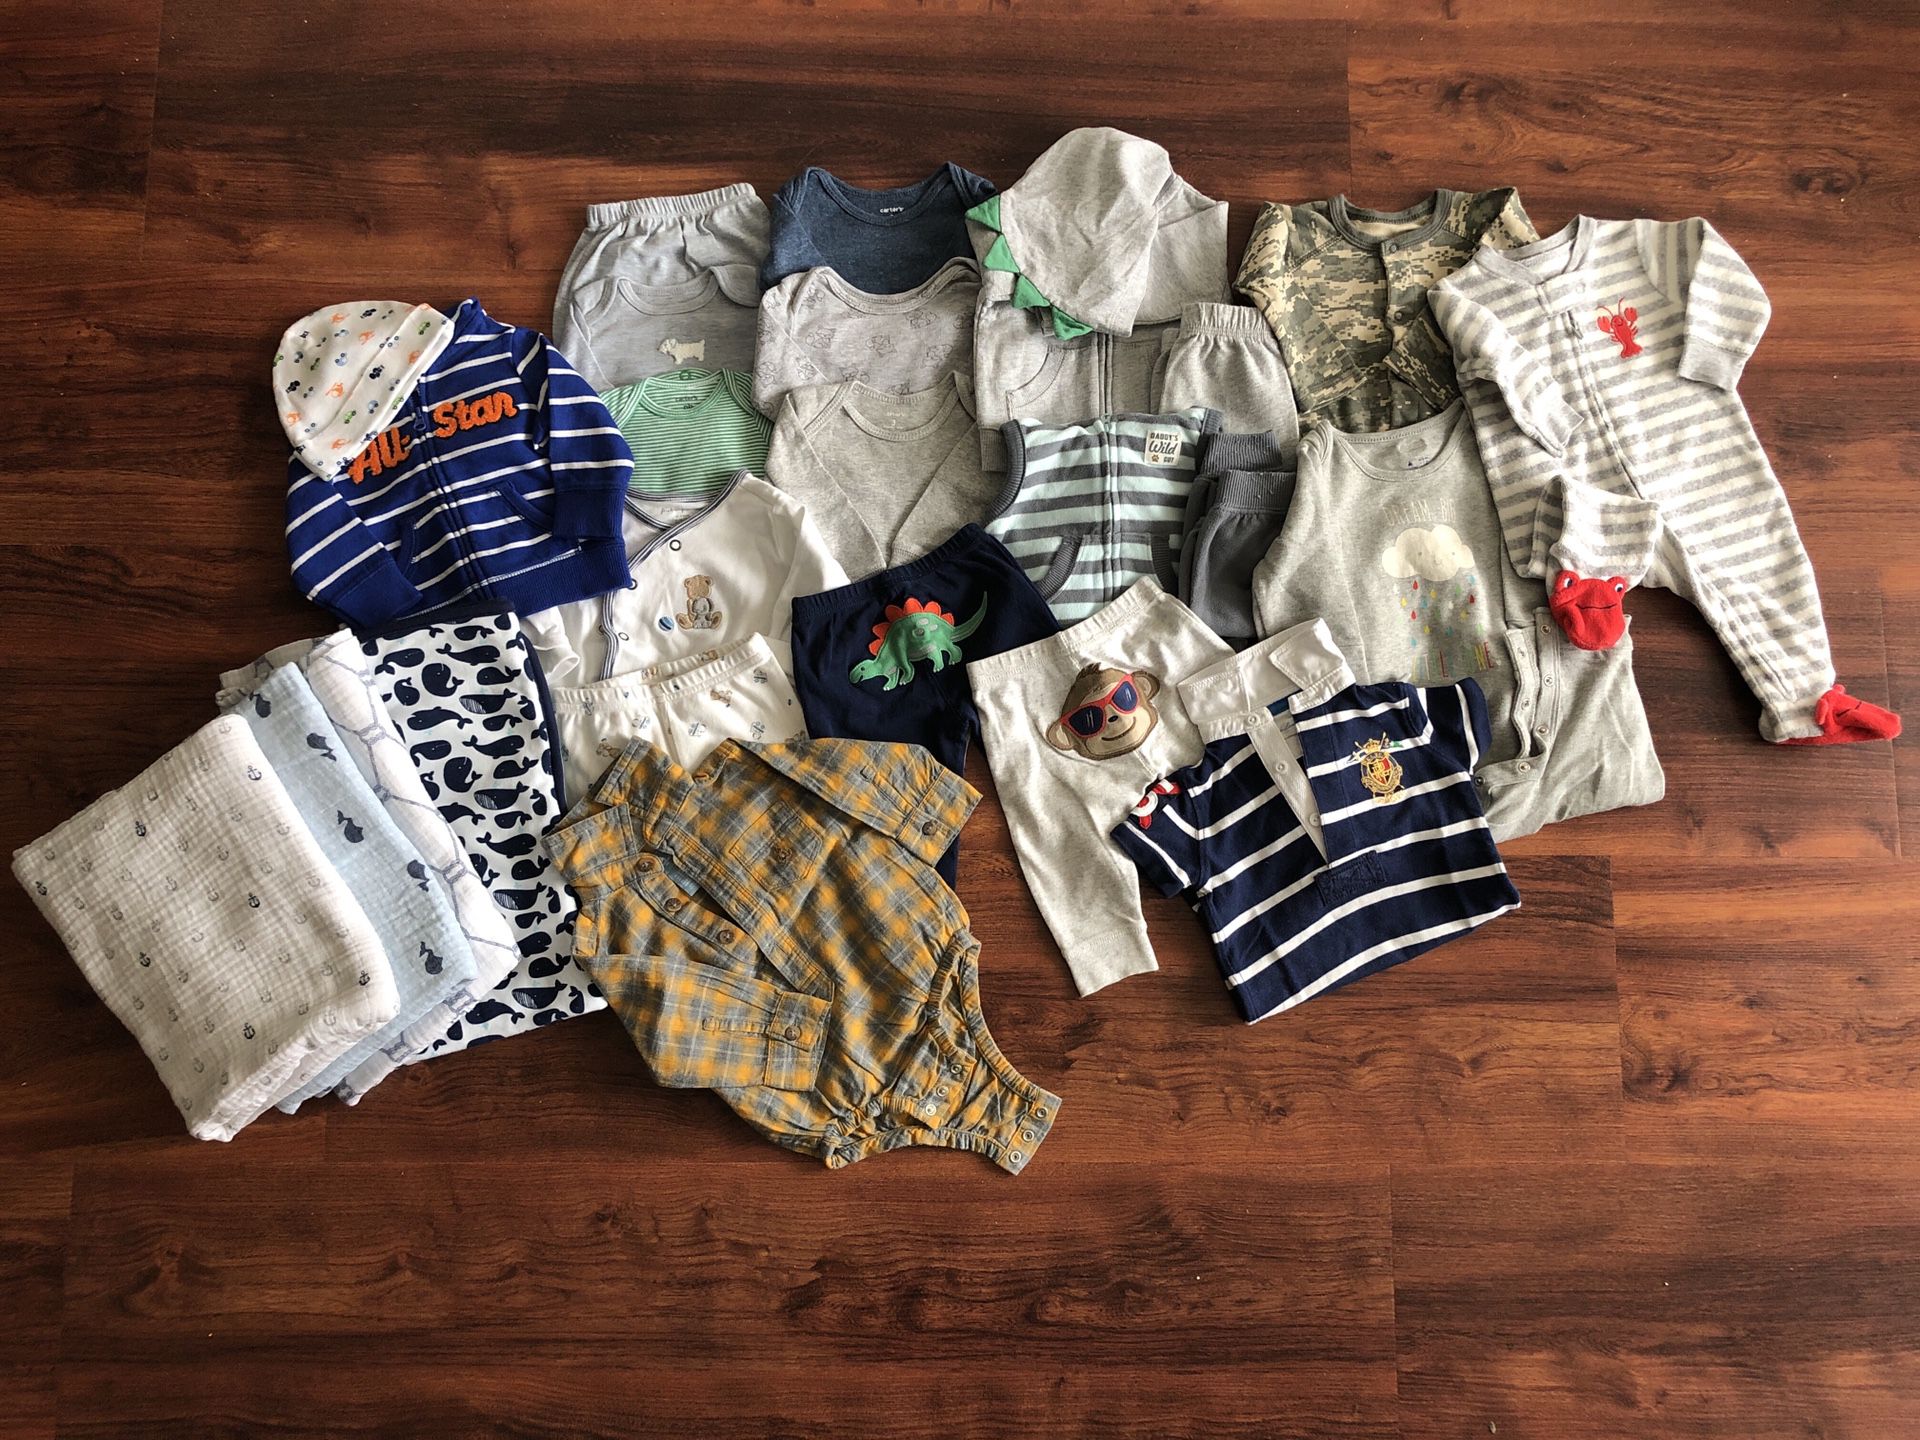 Baby Clothes- mostly size 3 months